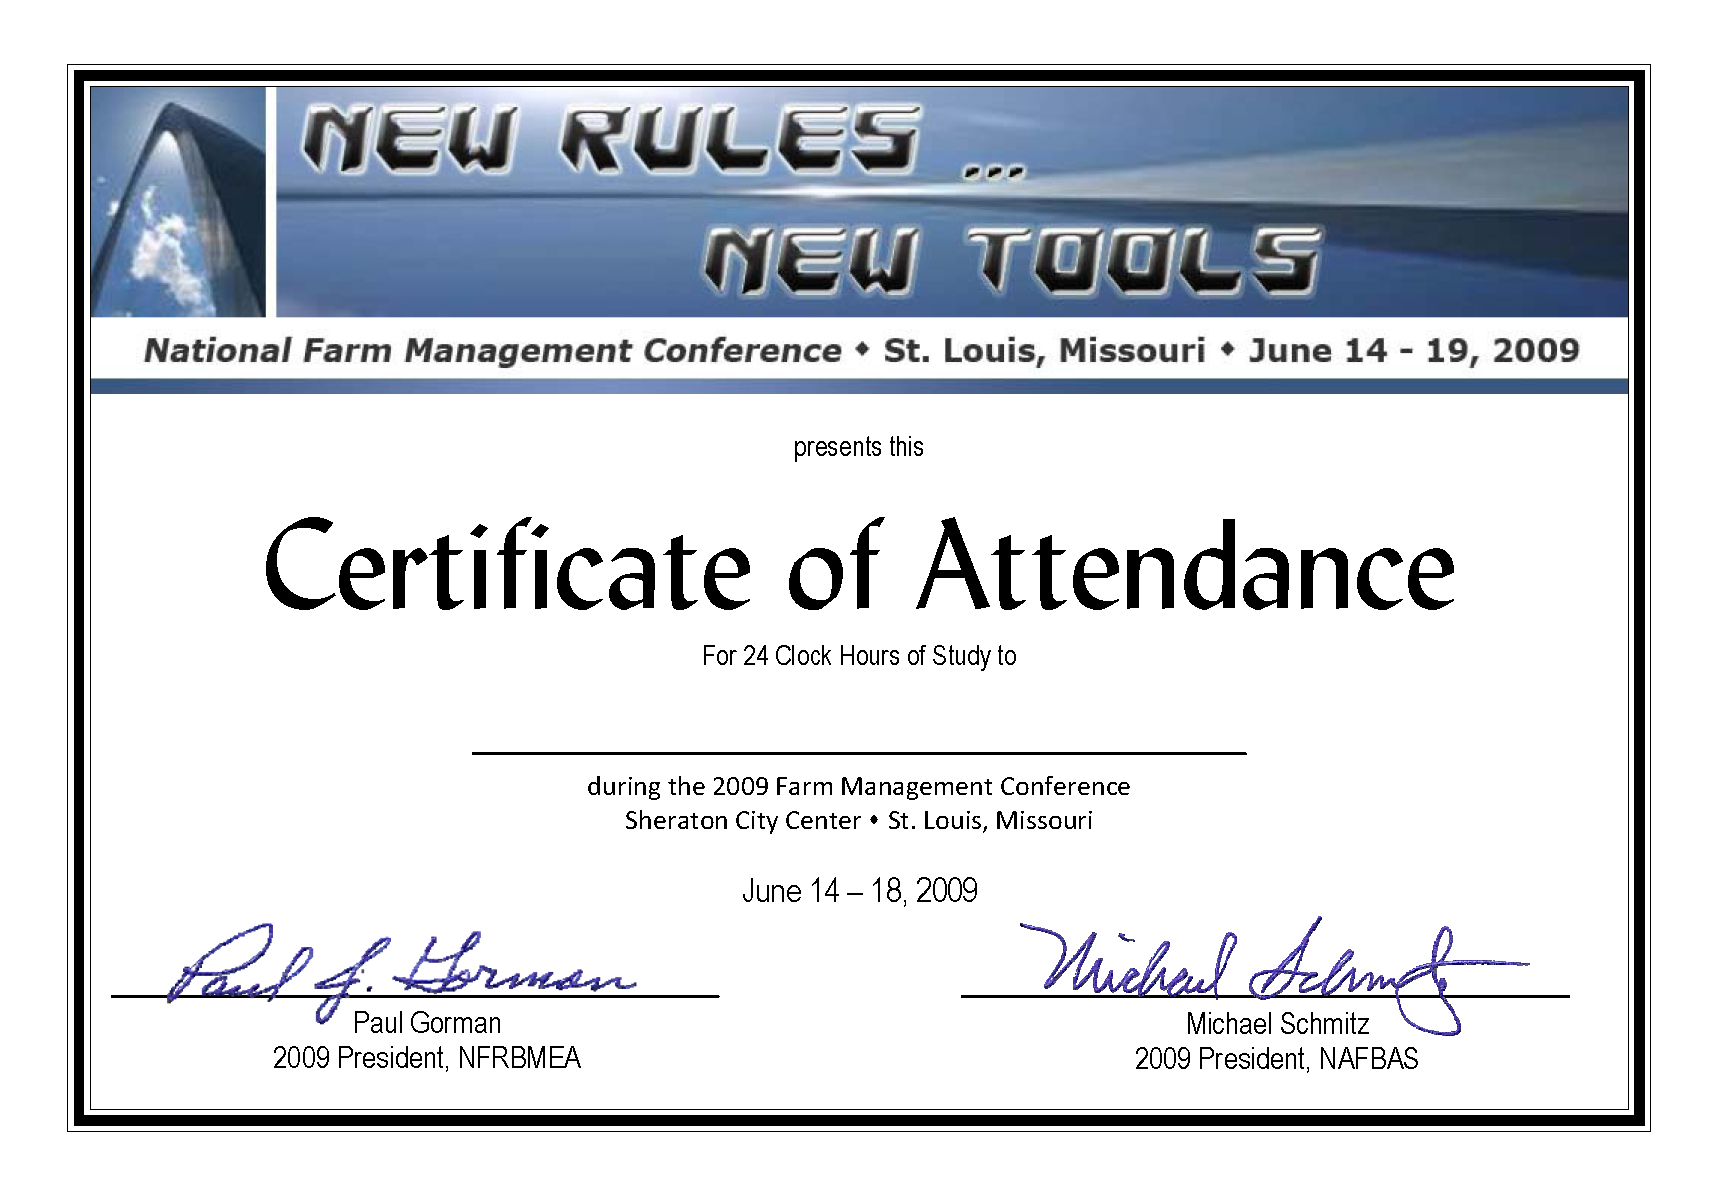 Conference Certificate Of Attendance Template – Great For Certificate Of Attendance Conference Template